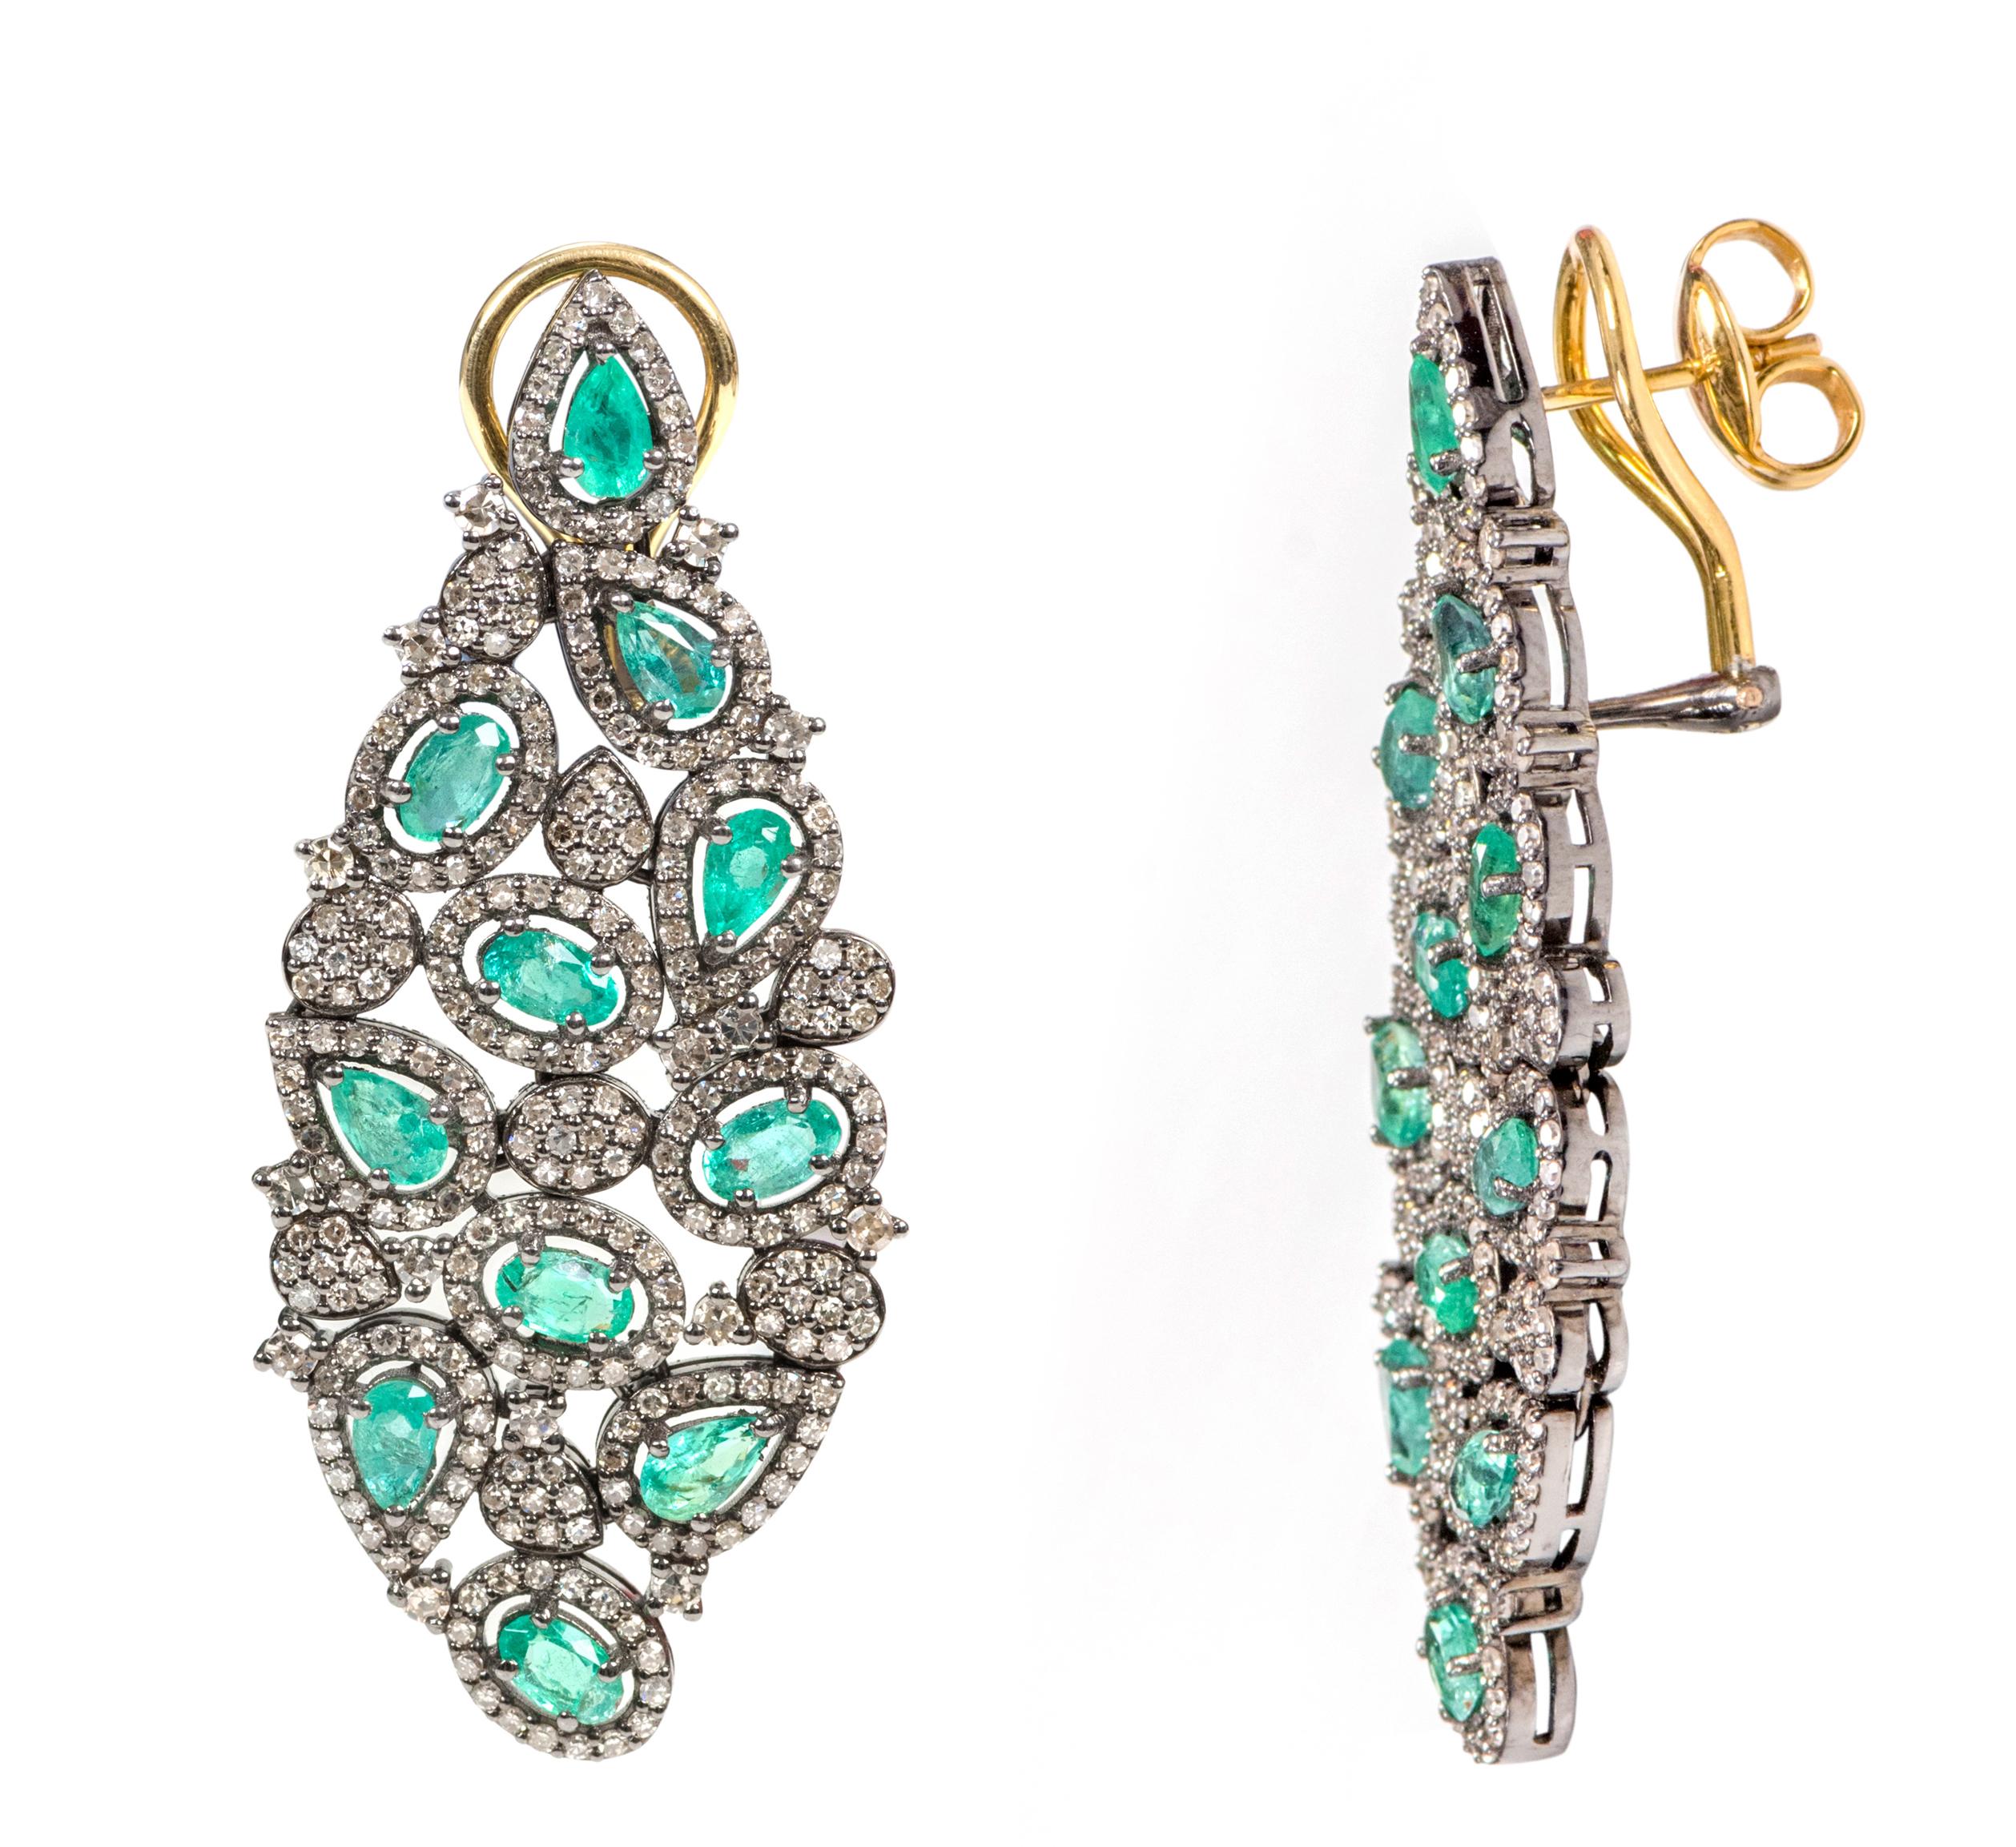 Emerald and Diamond Cocktail Leaf Earrings in Victorian Style

This Victorian-era art-deco style ravishing forest green emerald and diamond earring is appealing. The mix of transparent solitaire oval and pear-shaped emeralds surrounded with the halo